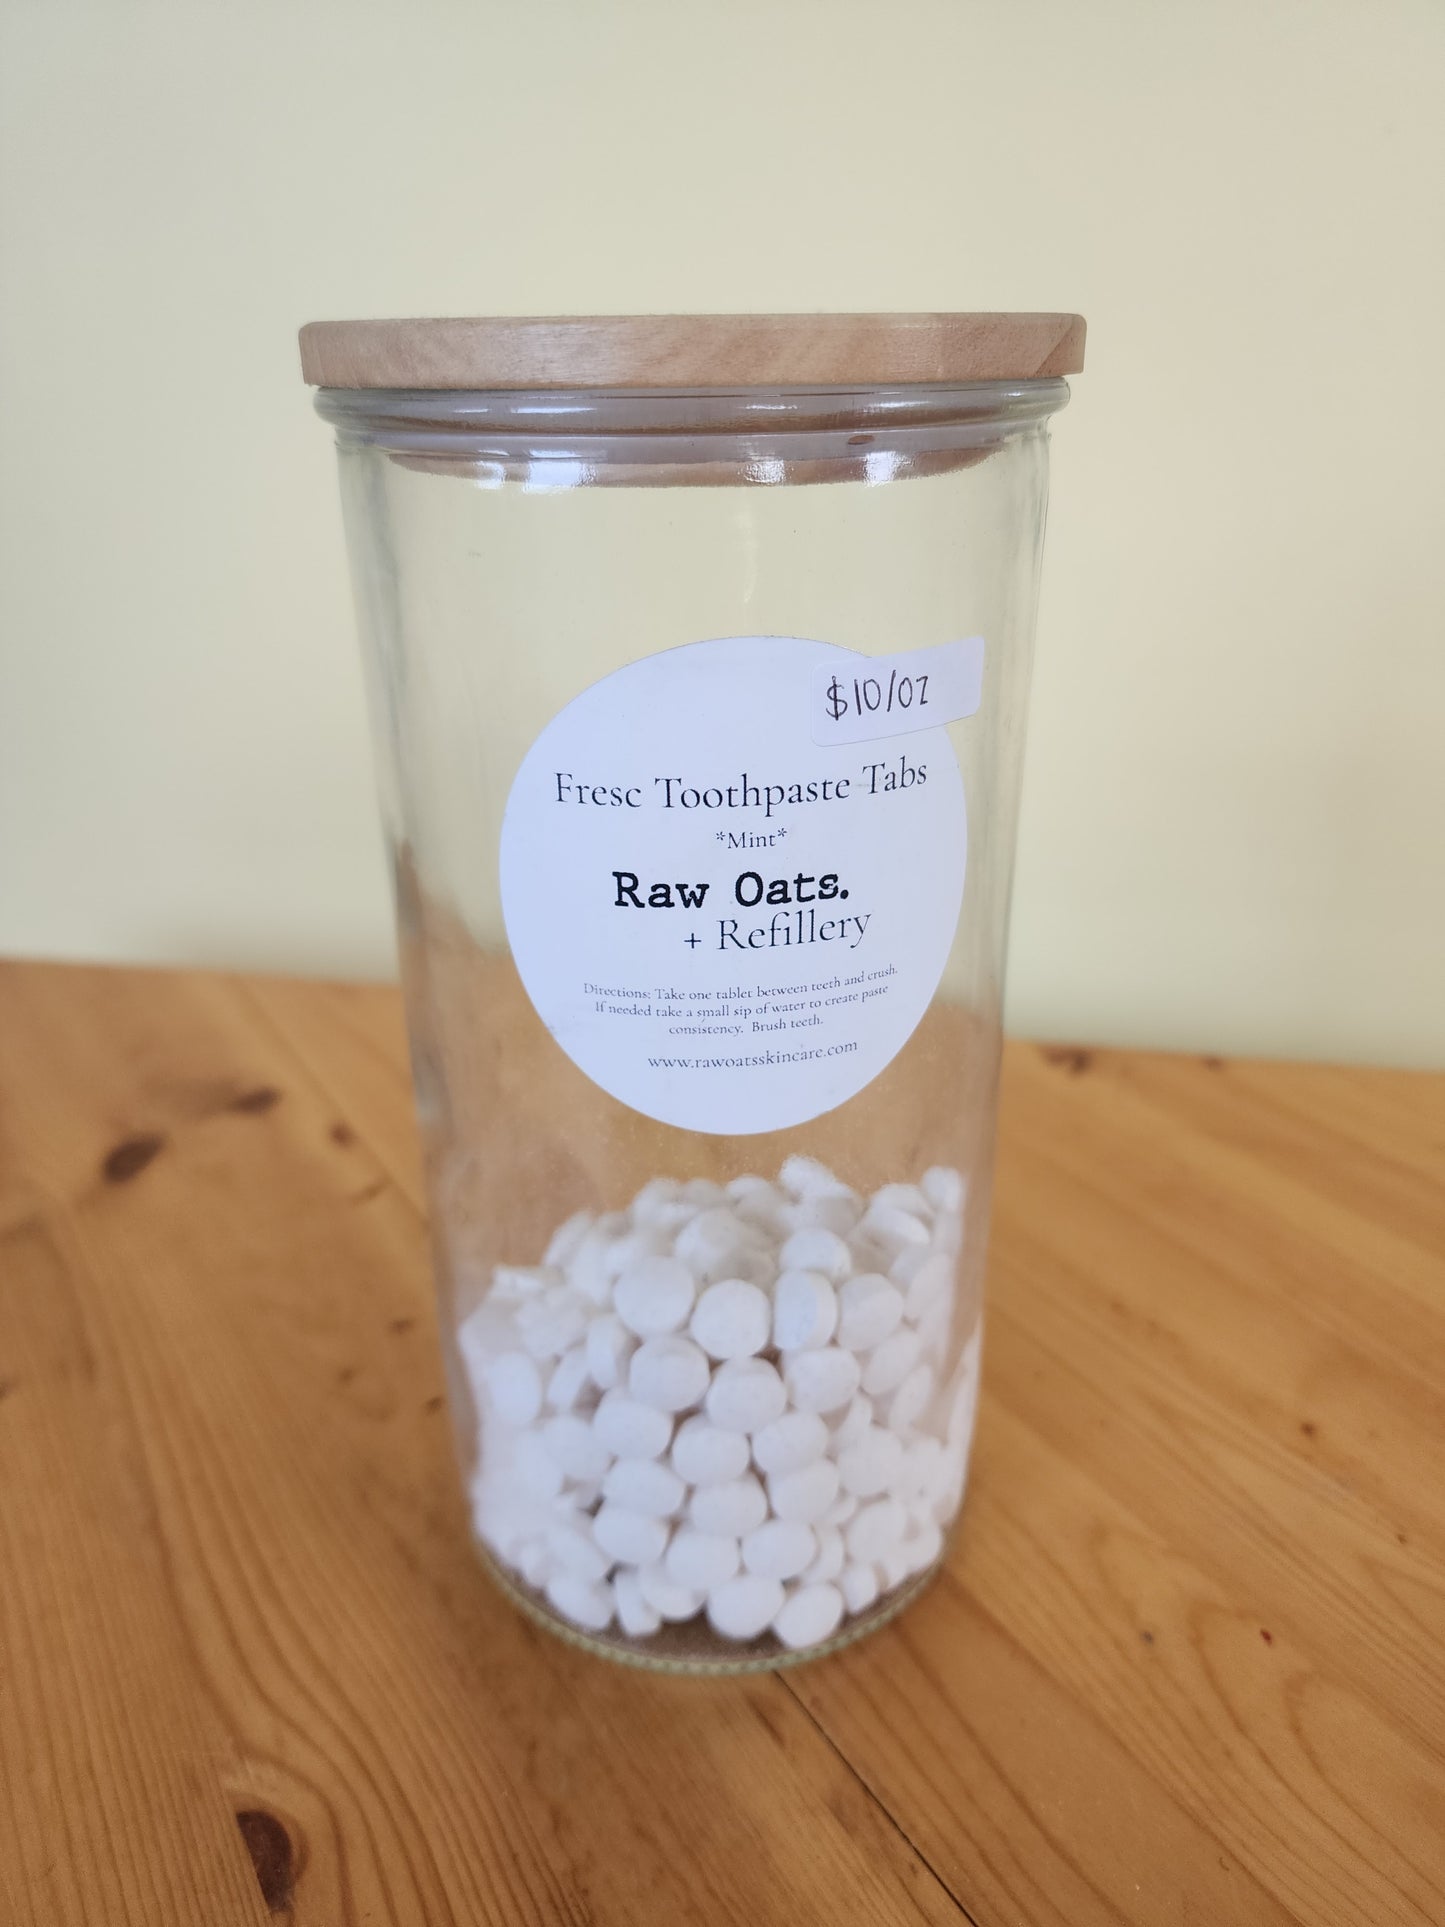 Natural toothpaste tabs